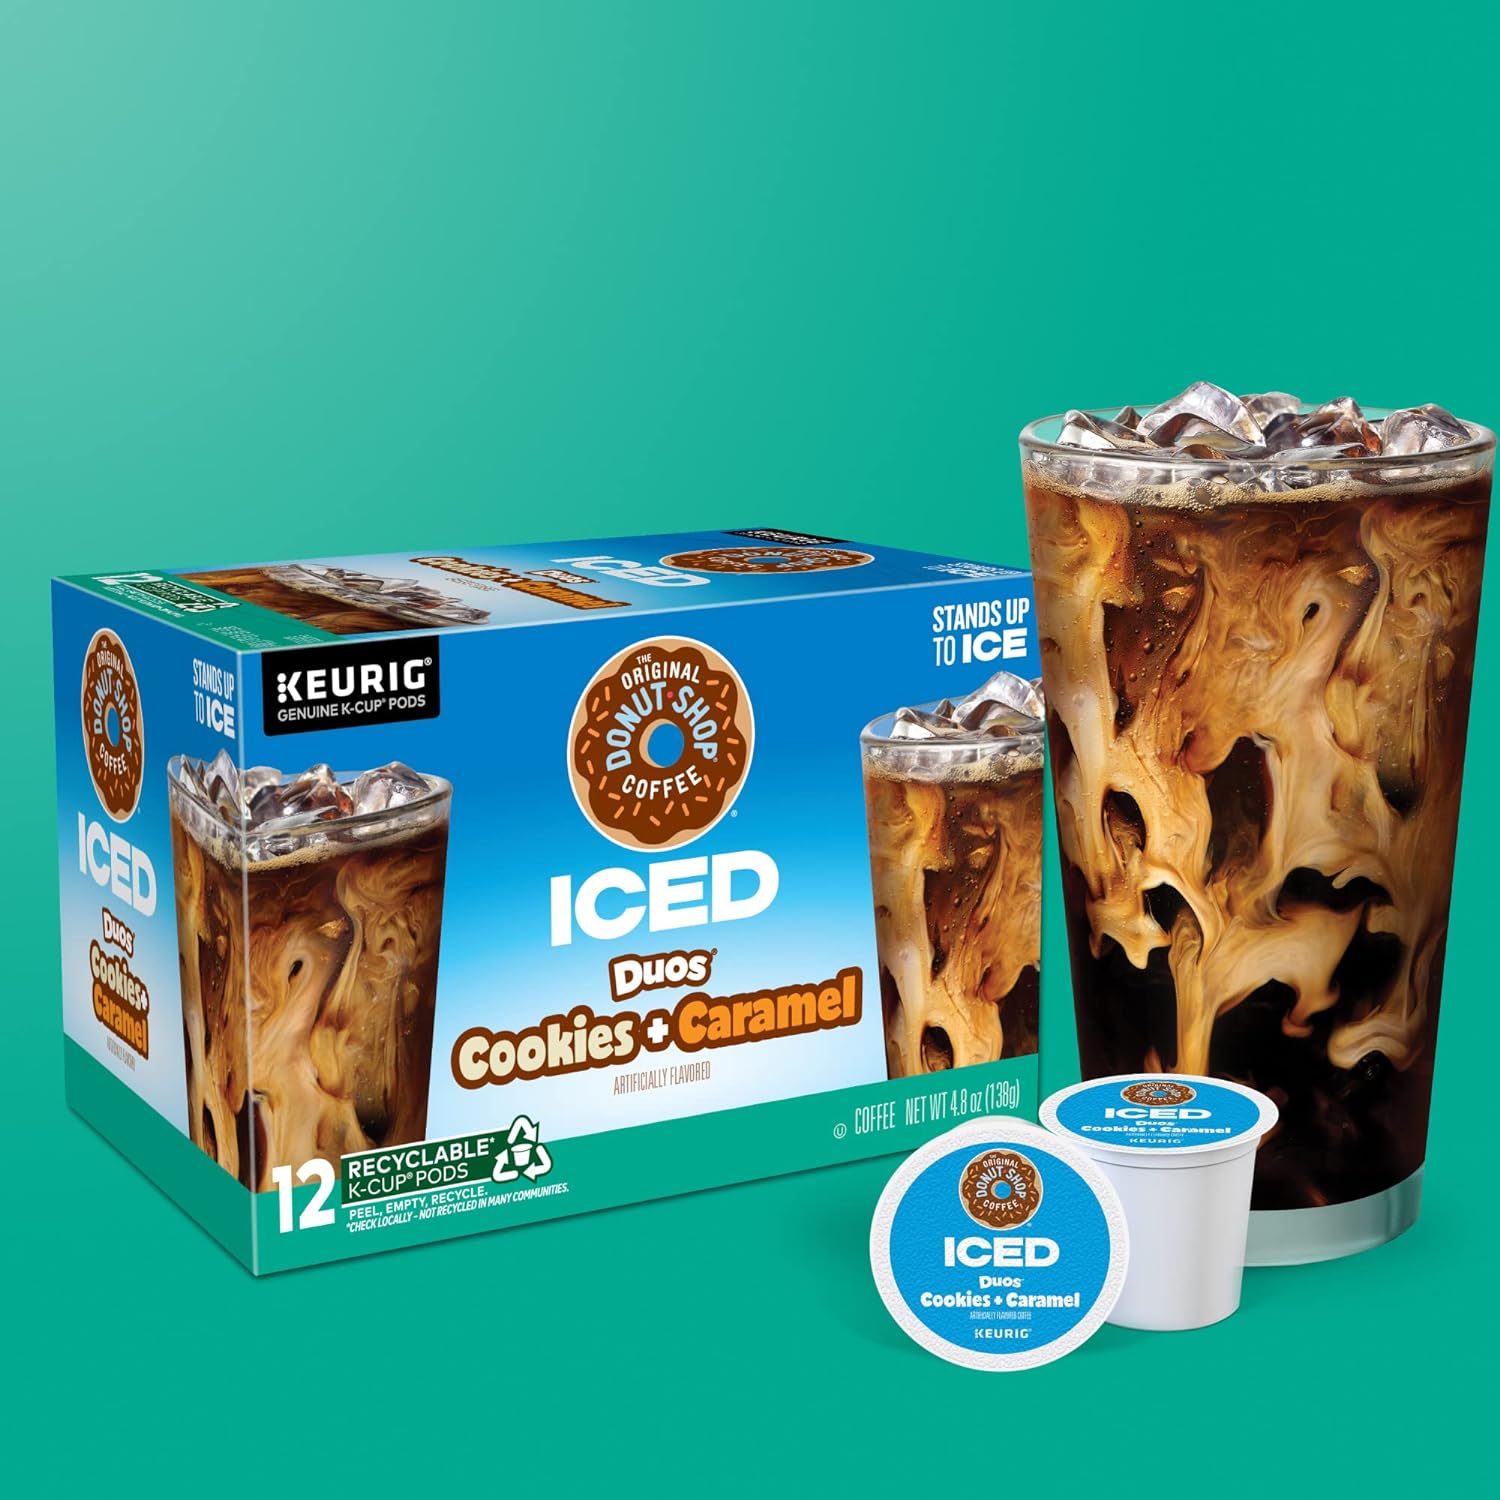 The Original Donut Shop ICED Duos Cookies + Caramel Coffee, Keurig Single Serve K-Cup Pods, 72 Count (6 Packs of 12)